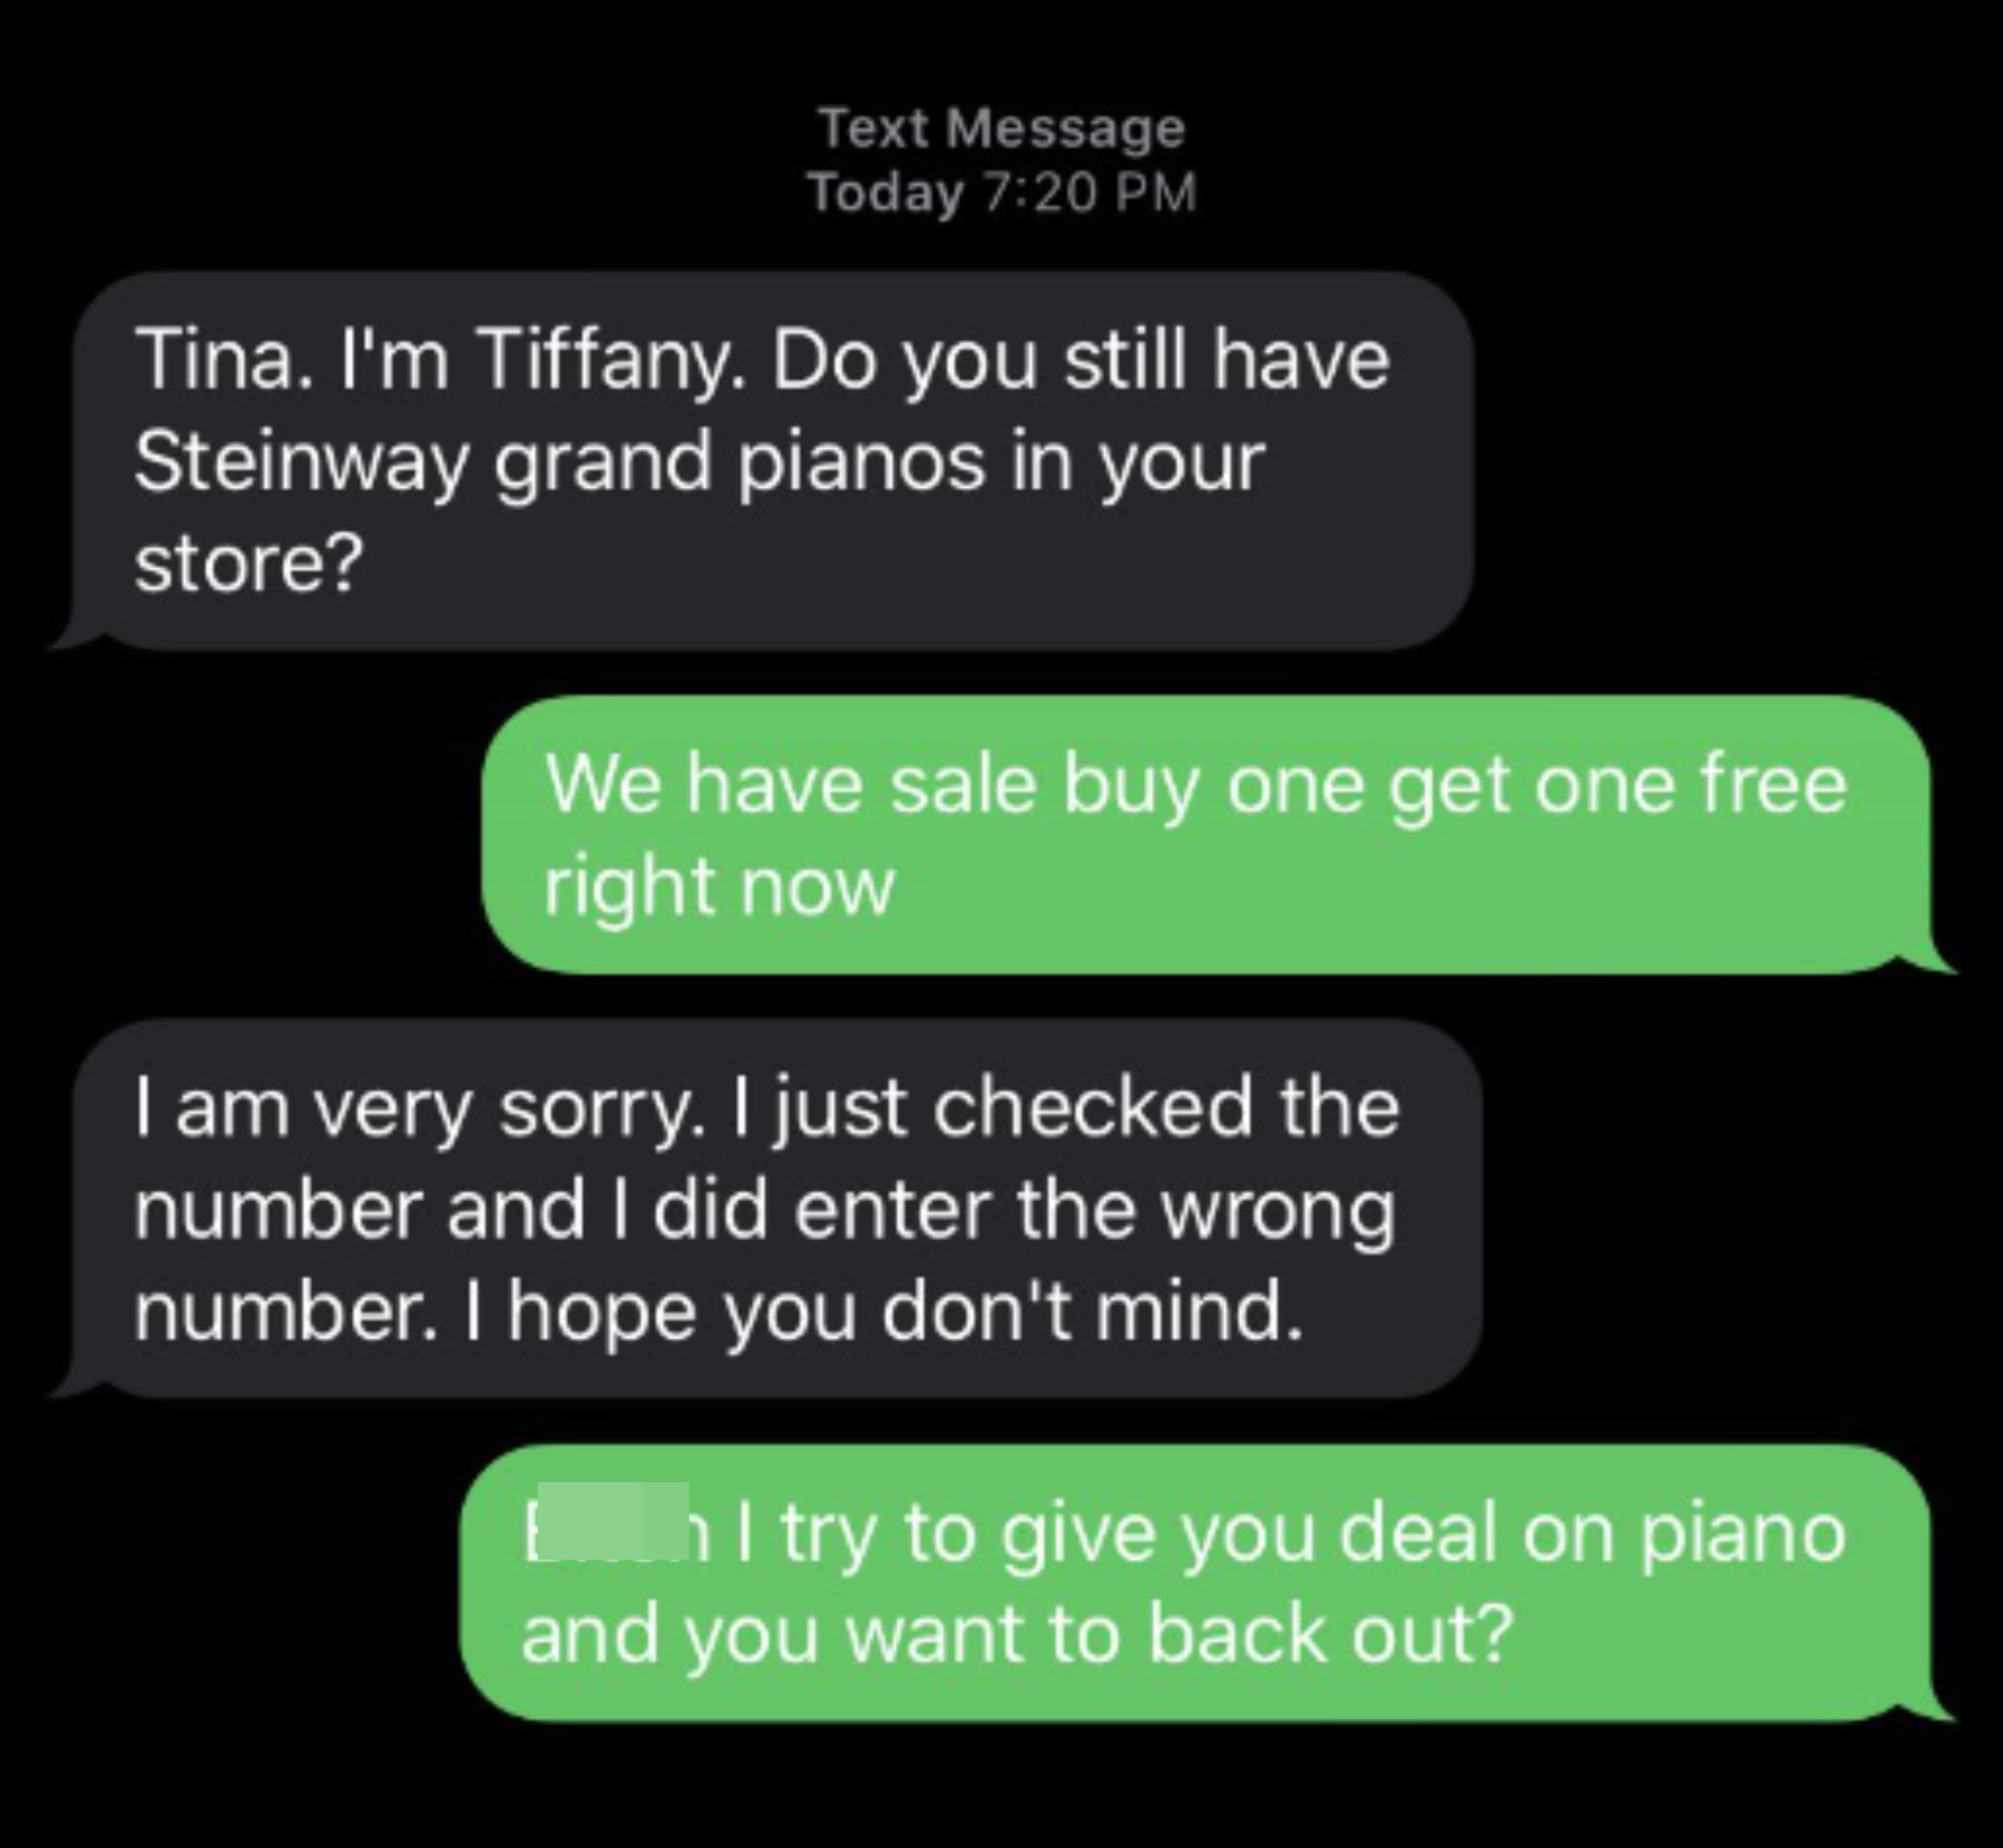 person responds to a scammers ask for grand pianos and the scammer ignores it